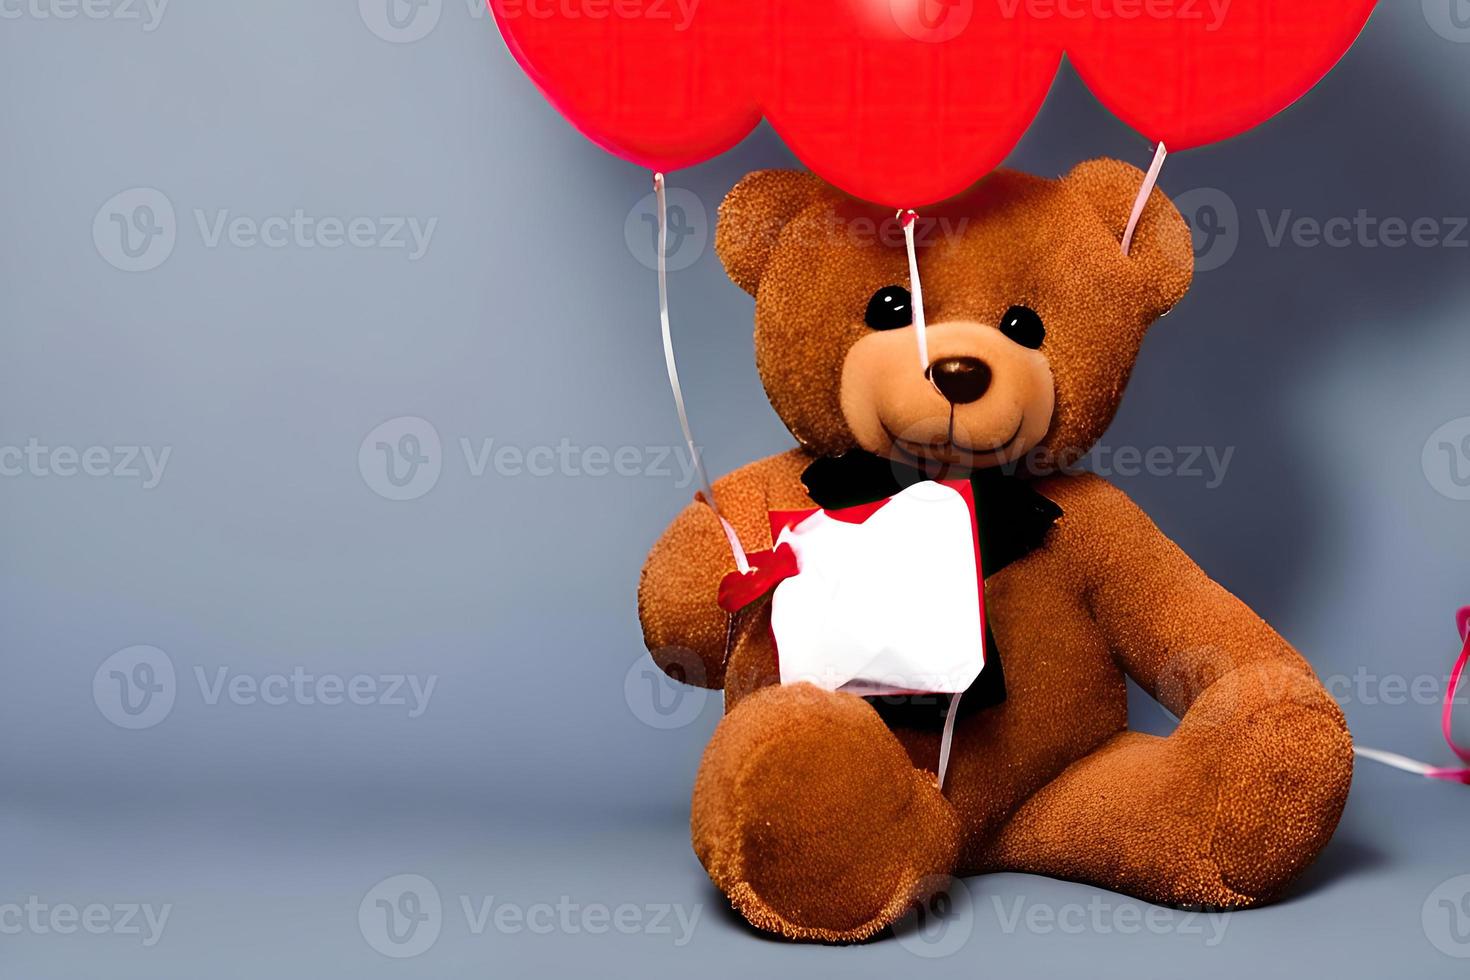 Surprise Party with a Teddy Bear and Red Balloon photo